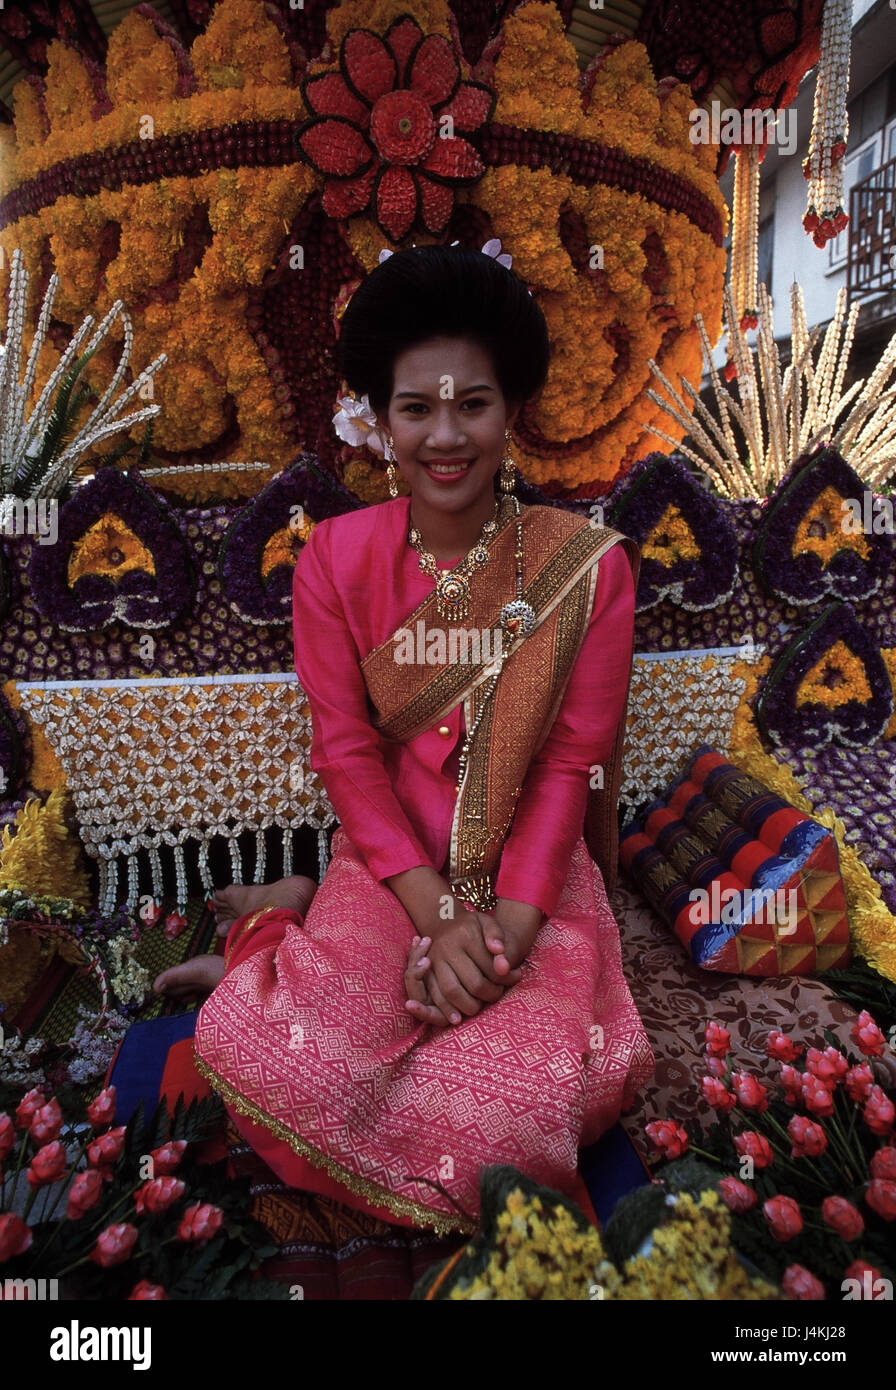 Thailand, Chiang May, flower feast, fixed carriage, detail, Thai procession, folklore, feast, February, woman, young, clothes, festively, traditionally Stock Photo